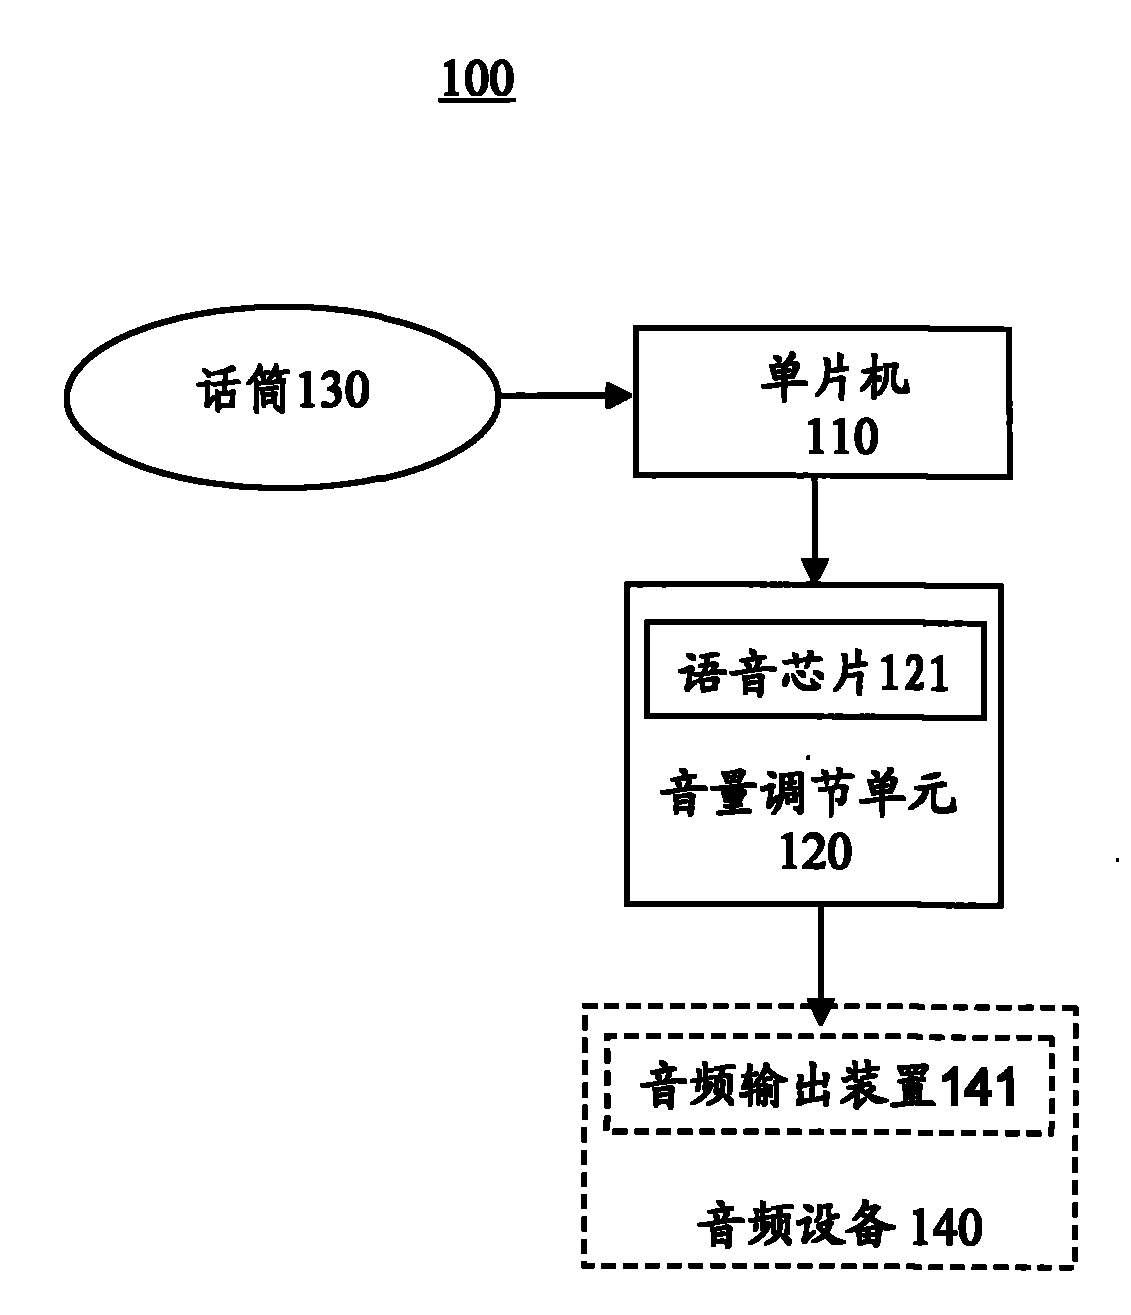 Device for automatically adjusting volume of audio equipment according to frequency of outside sound